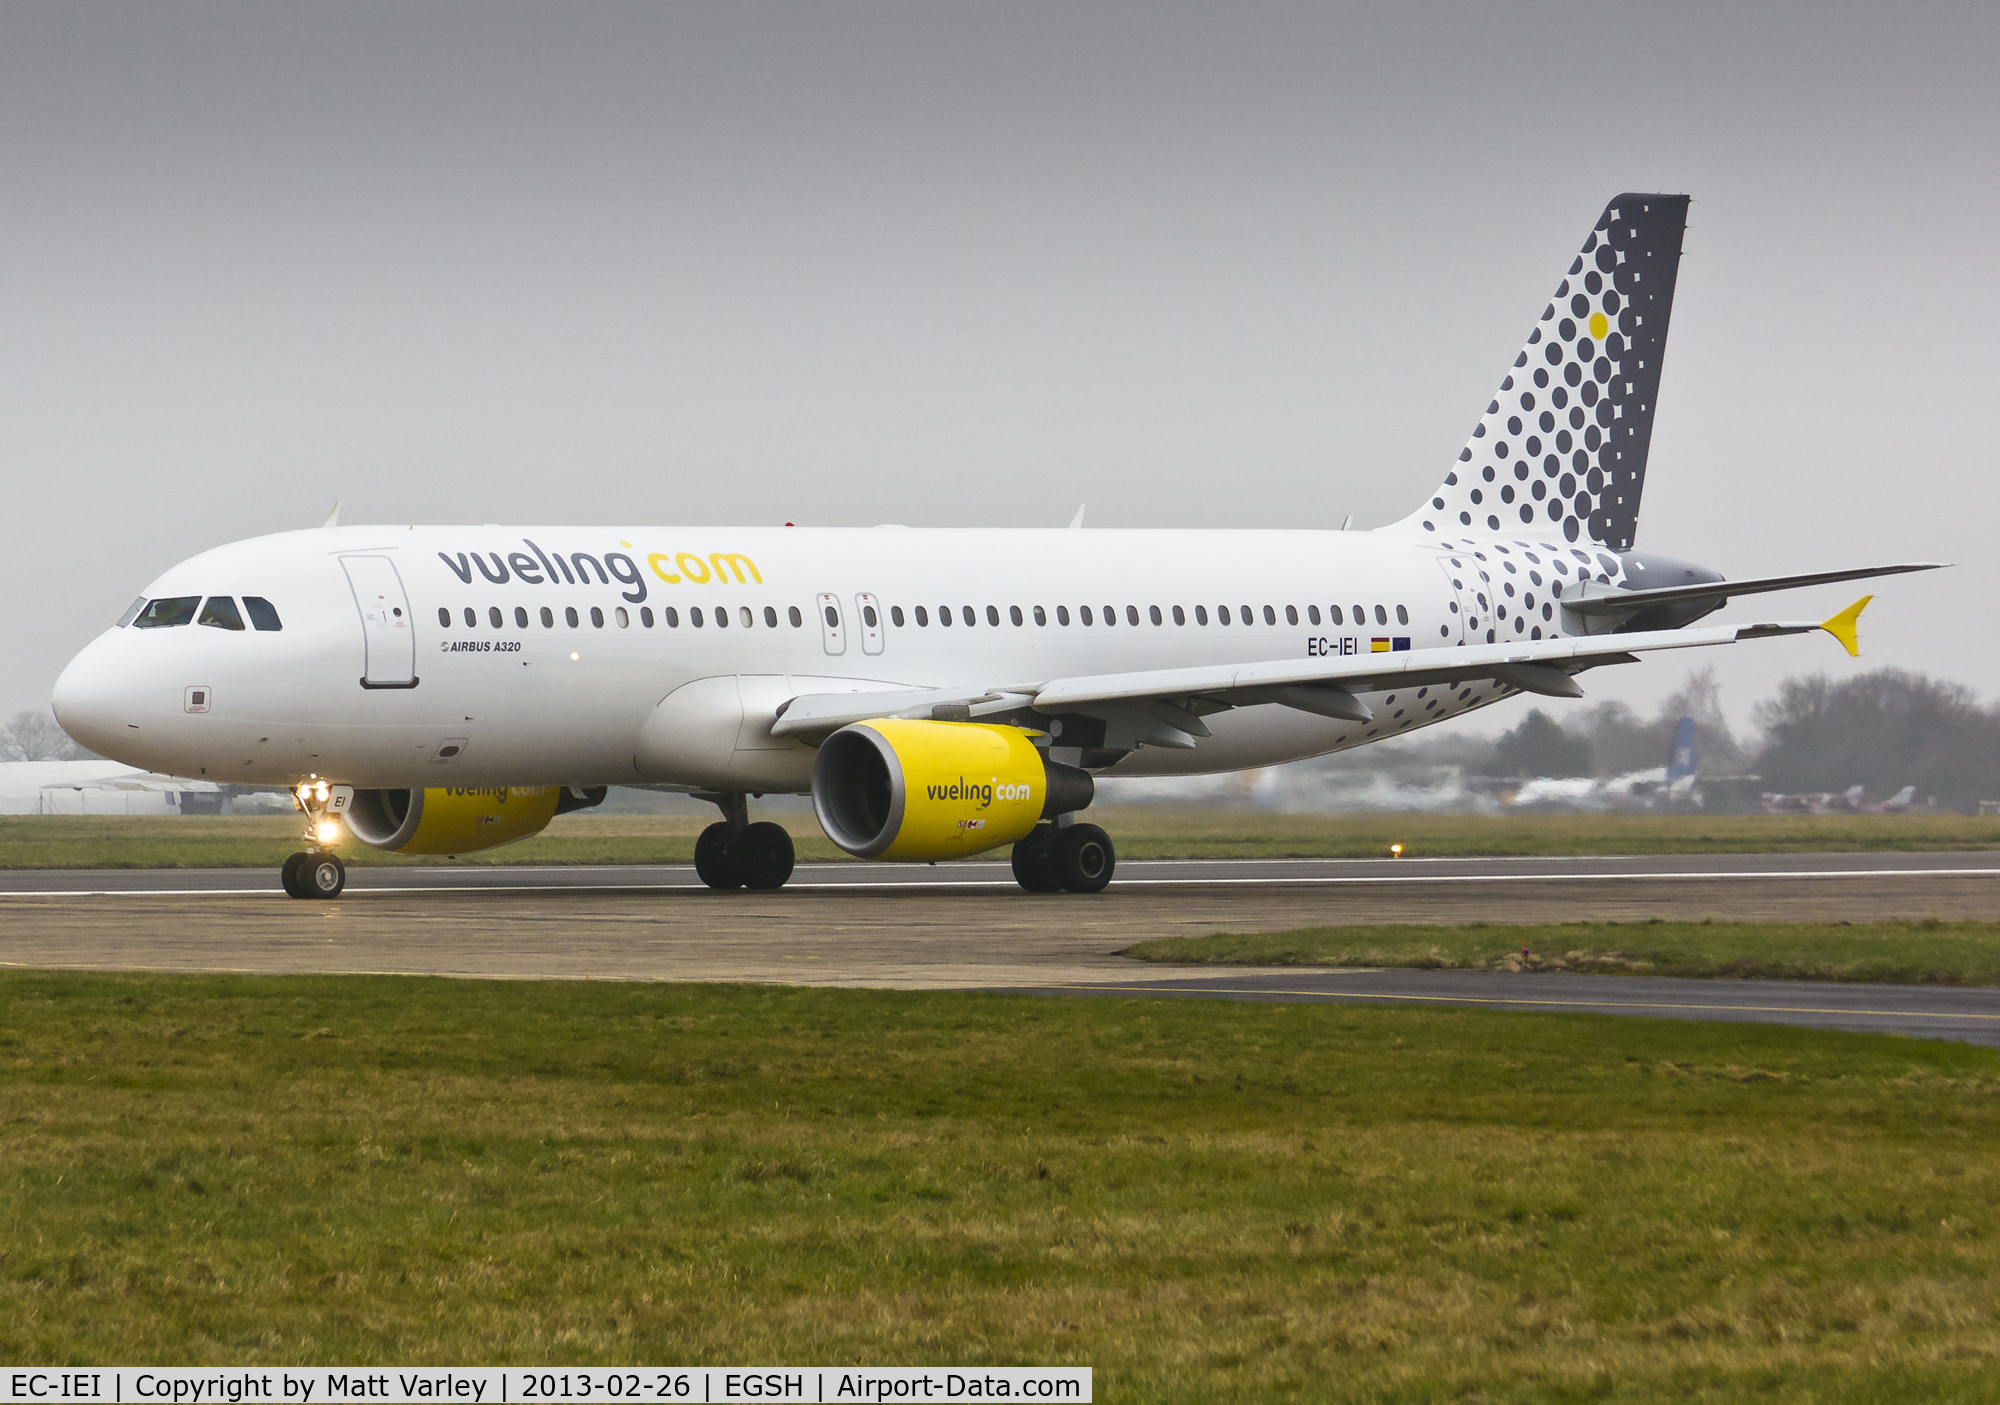 EC-IEI, 2001 Airbus A320-214 C/N 1694, Departing EGSH after spray into Vueling C/S.